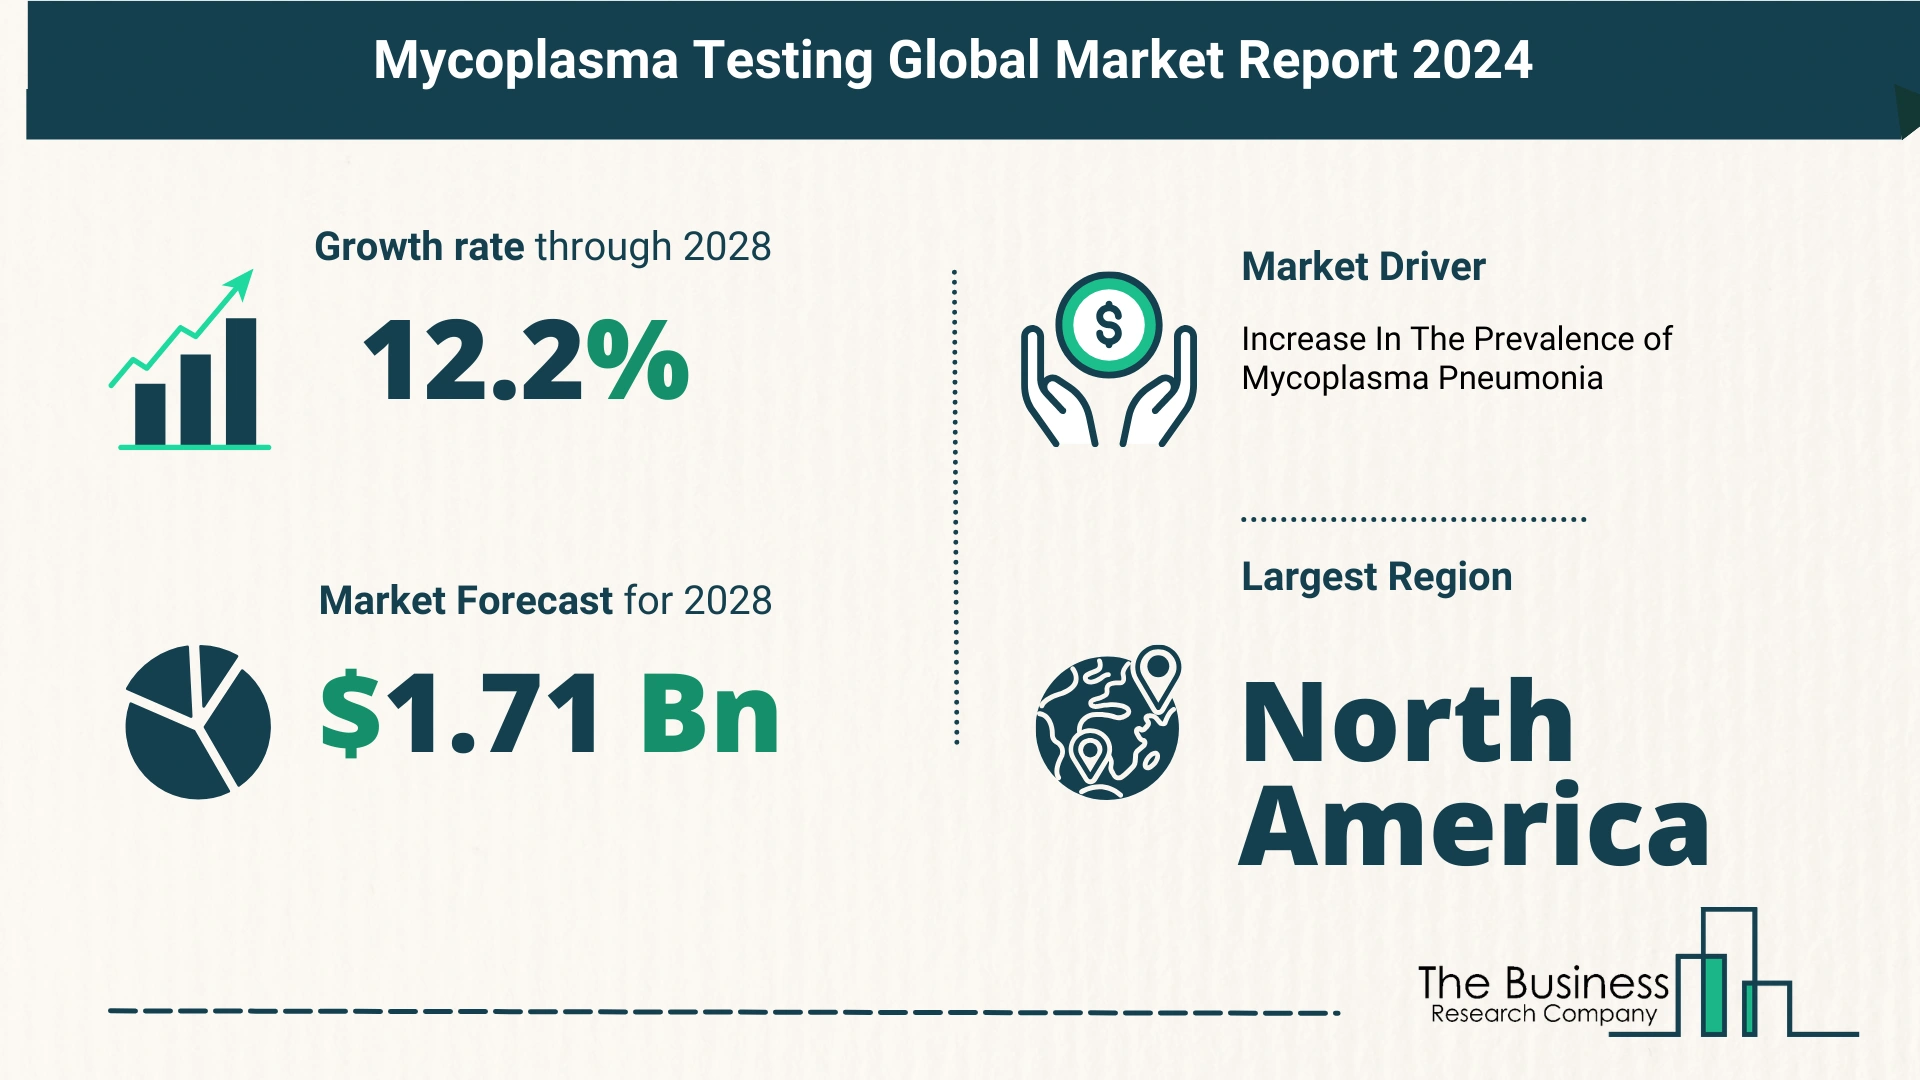 Top 5 Insights From The Mycoplasma Testing Market Report 2024